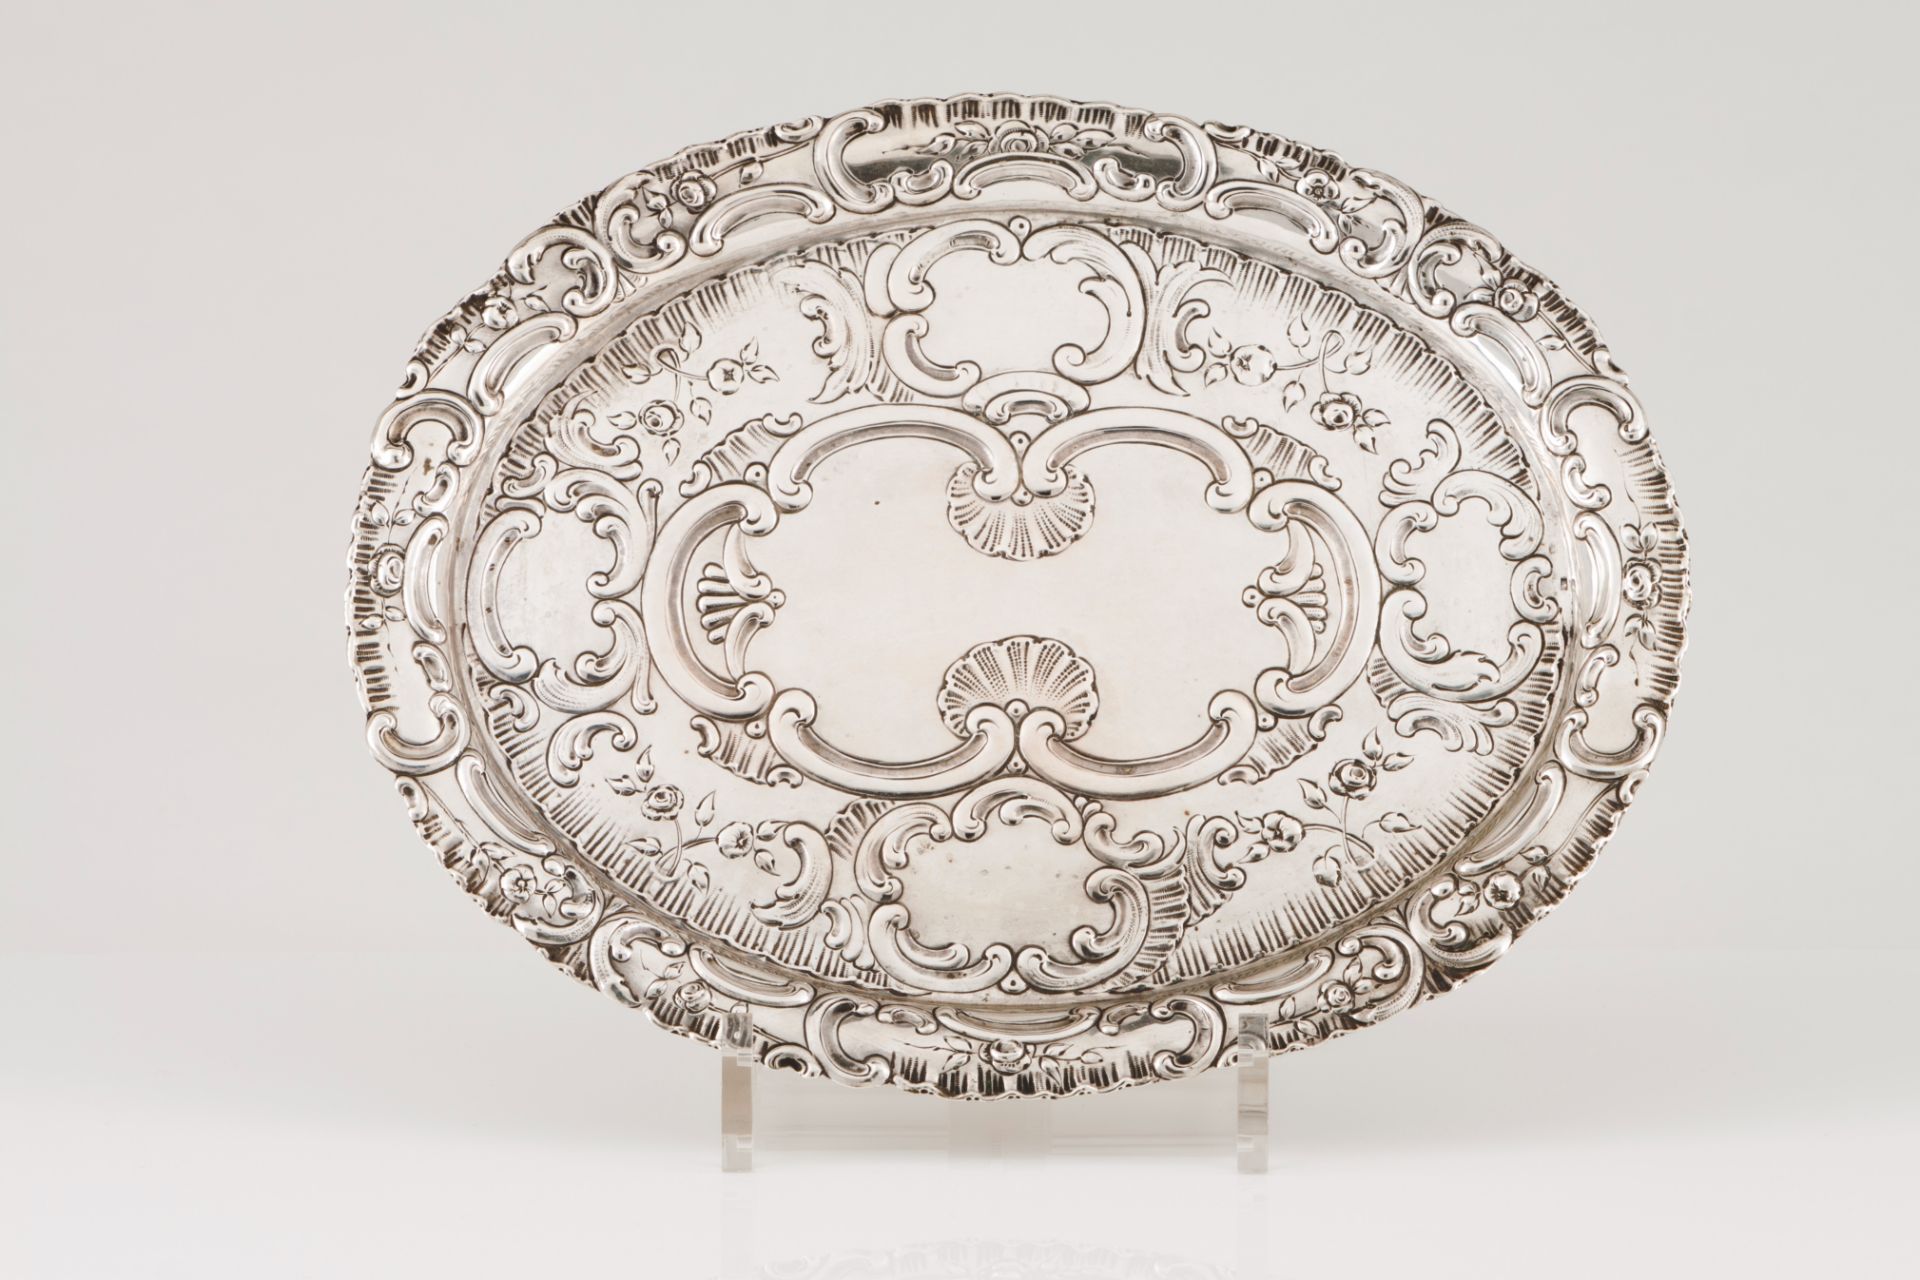 A small serving platterGerman silver Elliptic shaped fully decorated with foliage elements, winglets